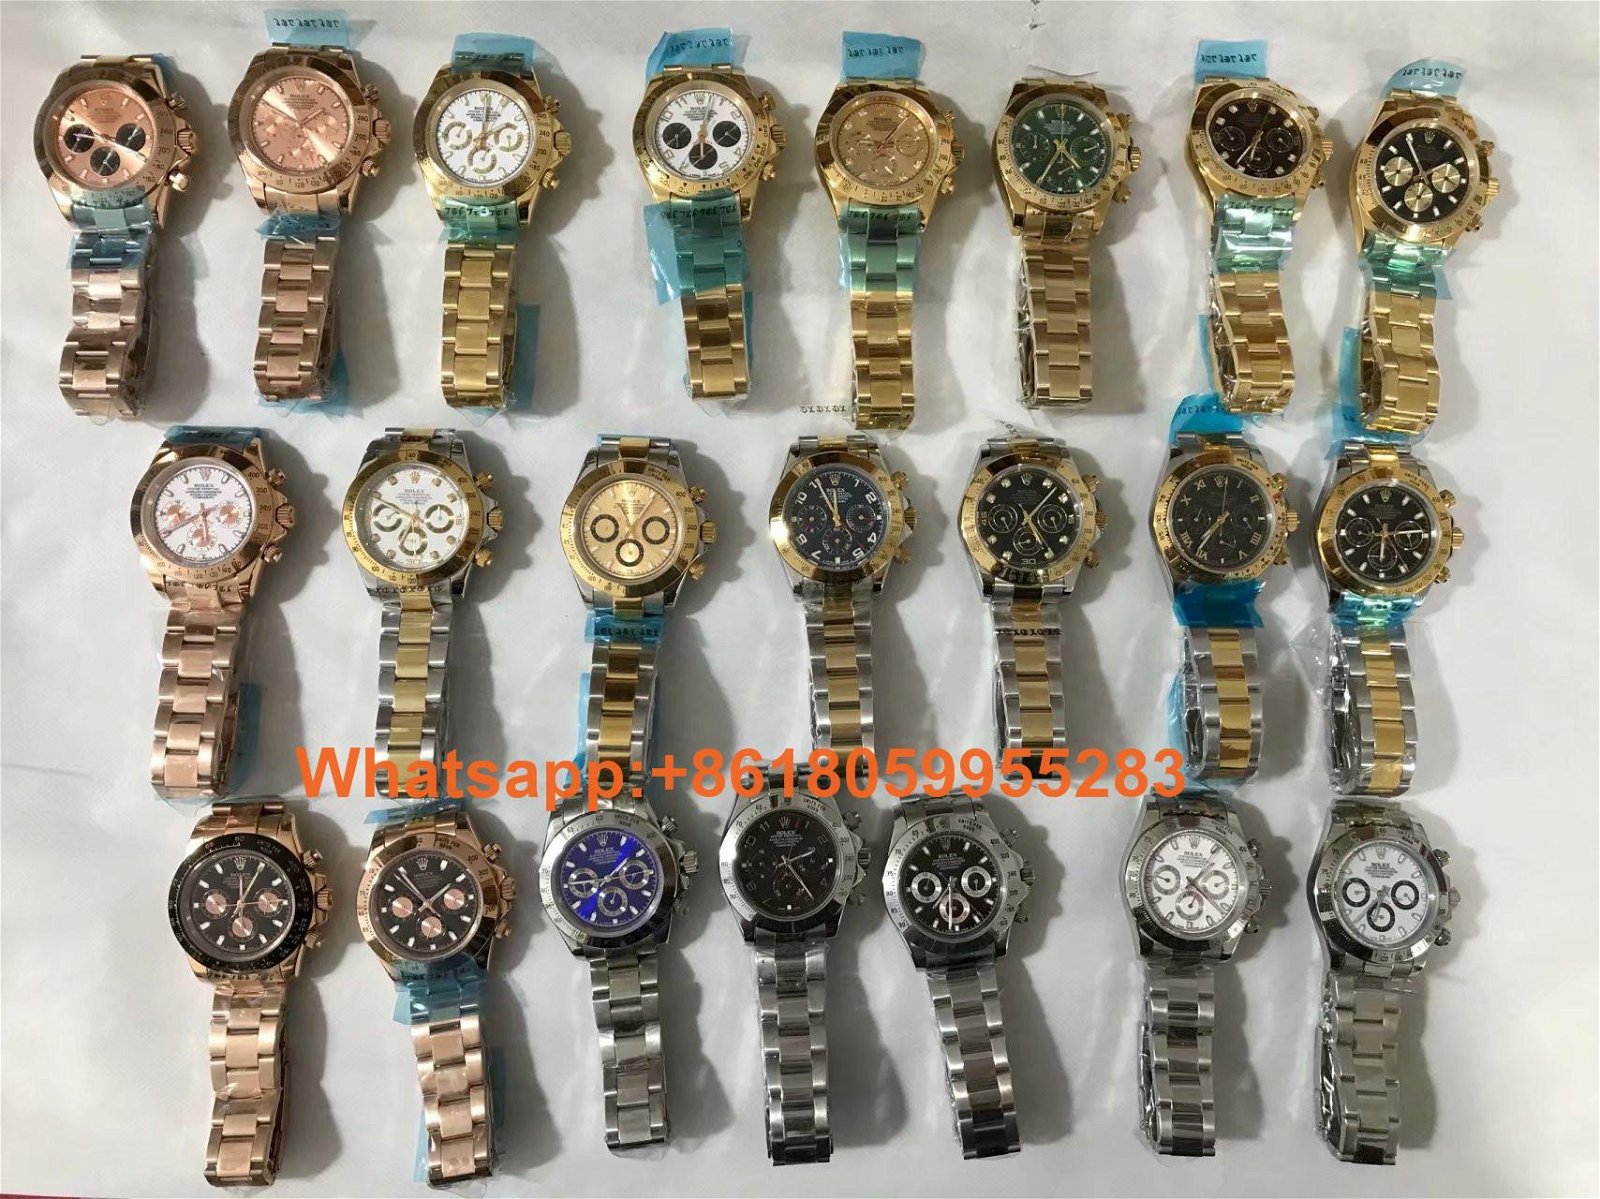 wholesale Rolex Watches 1:1 Swiss Made sapphire glass movement Replica Watches